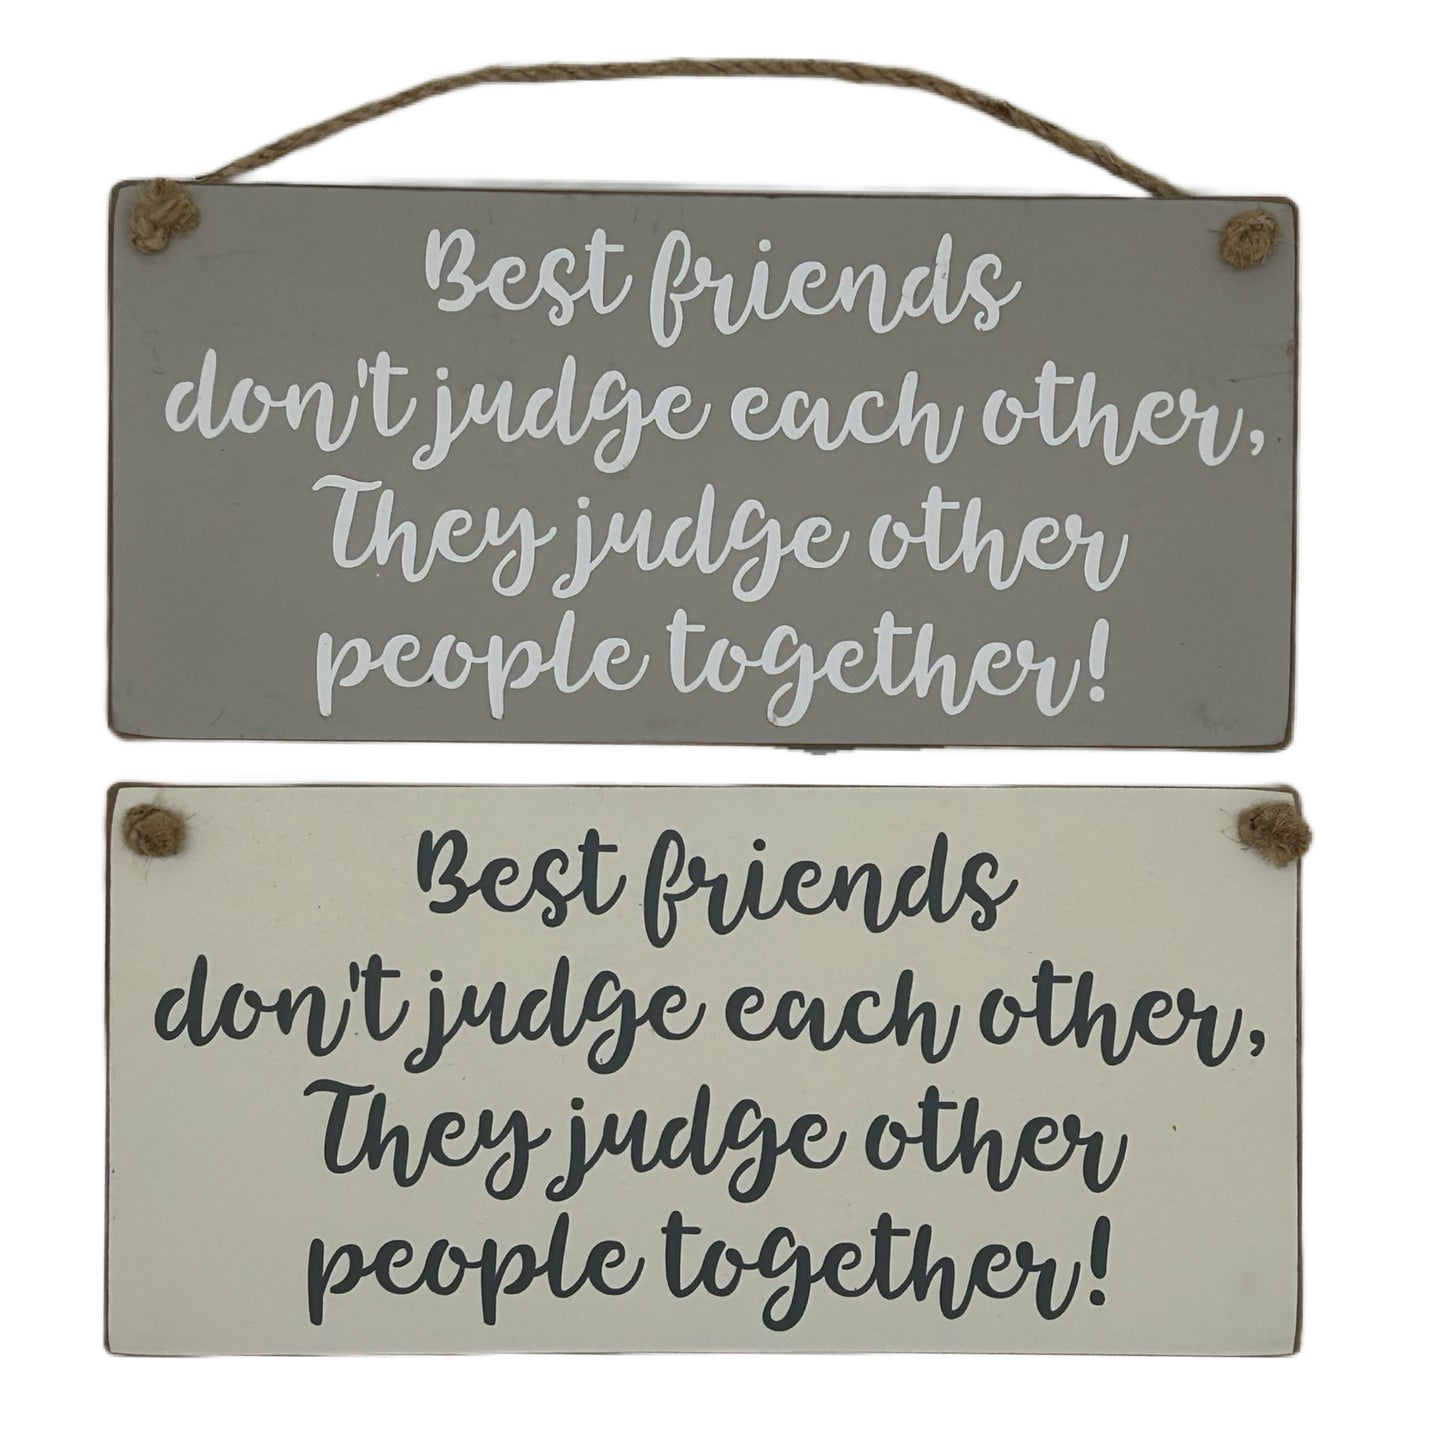 Best friends don't judge each other, they judge other people together!